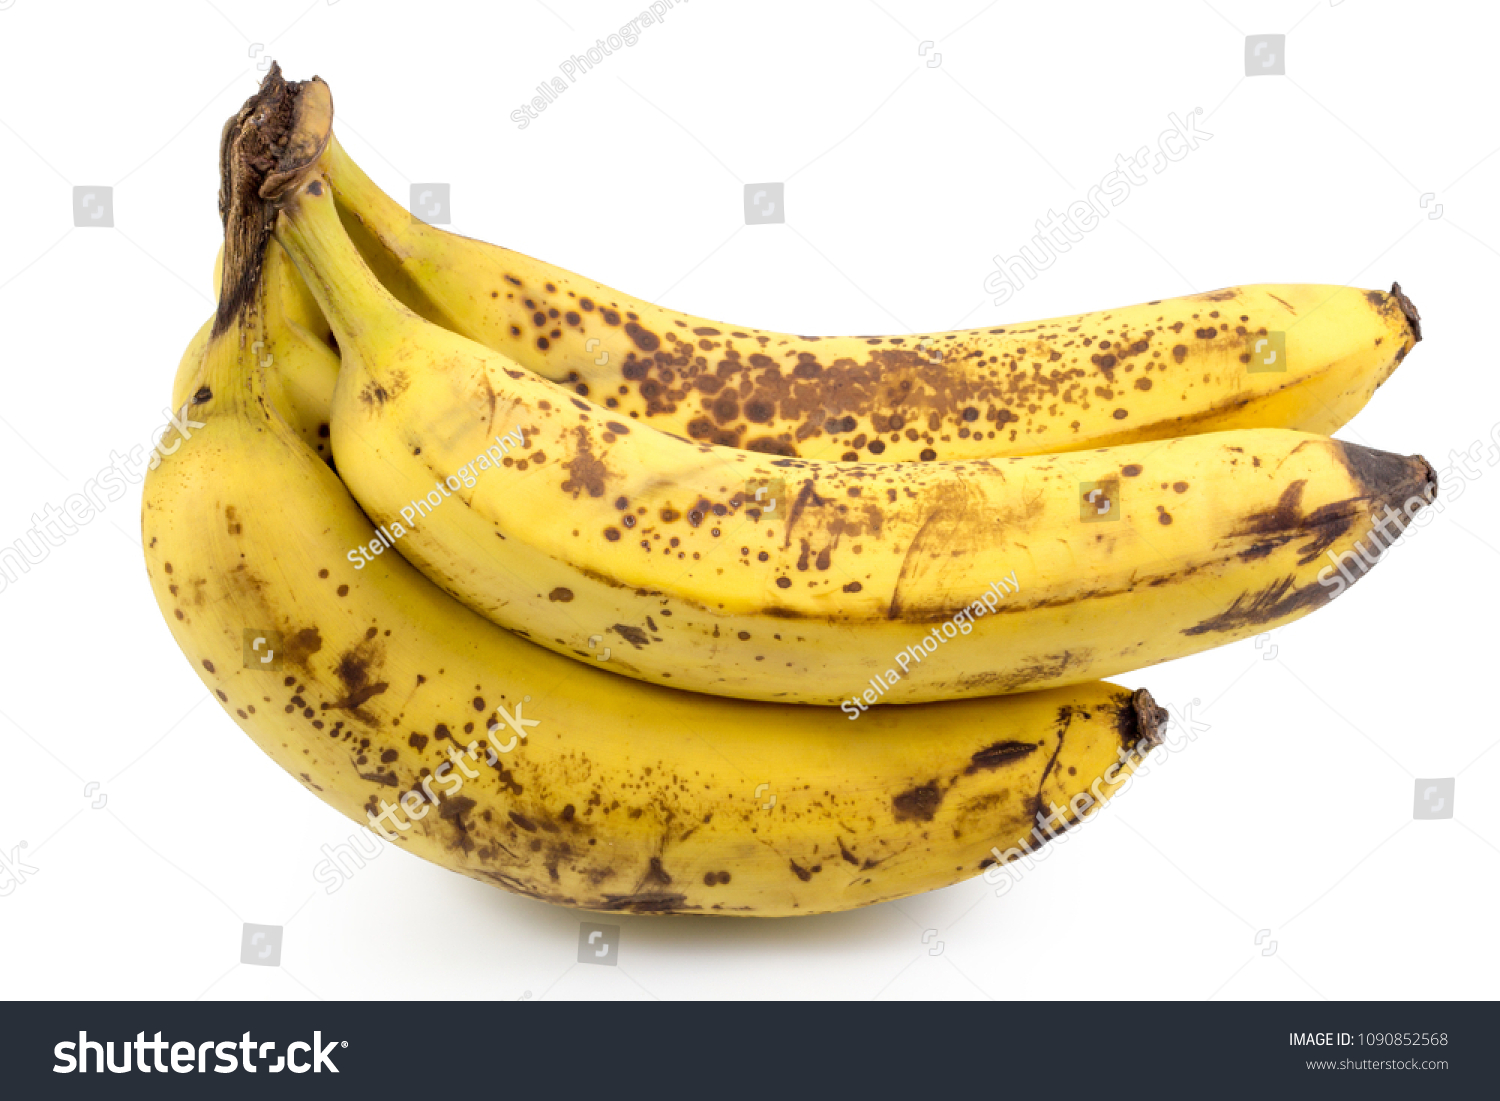 Ripe yellow bananas fruits, bunch of ripe bananas with dark spots on a white background with clipping path. #1090852568